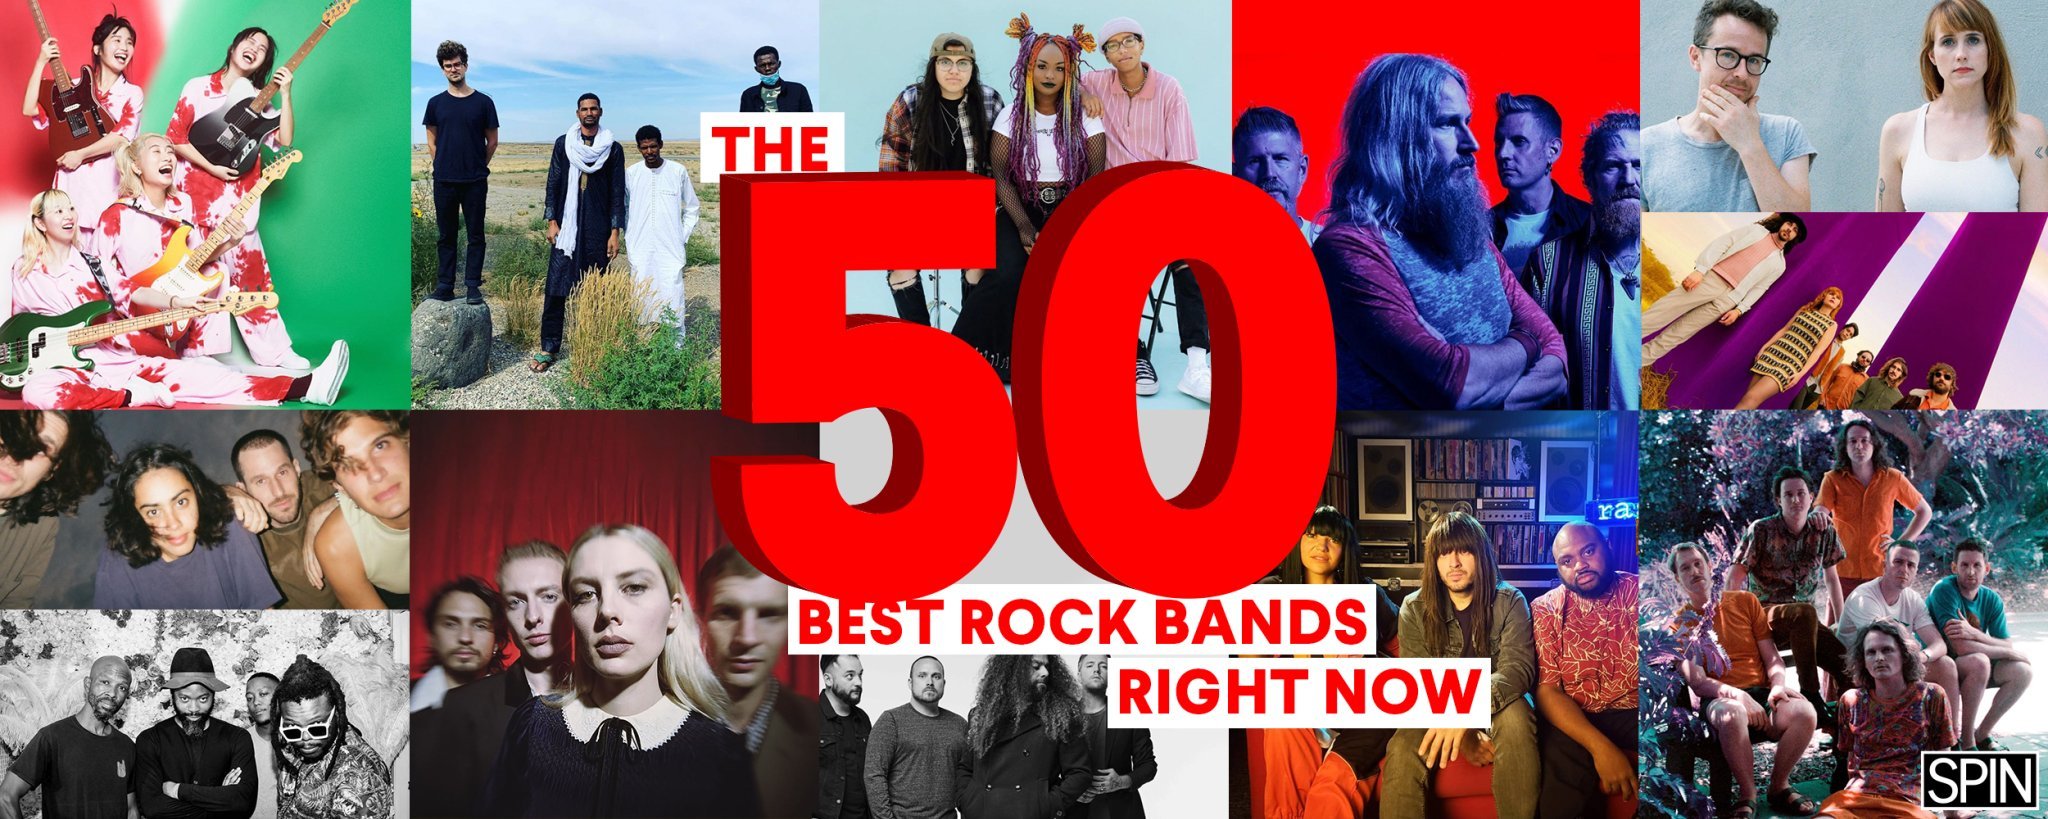 The world's best rock bands—right now